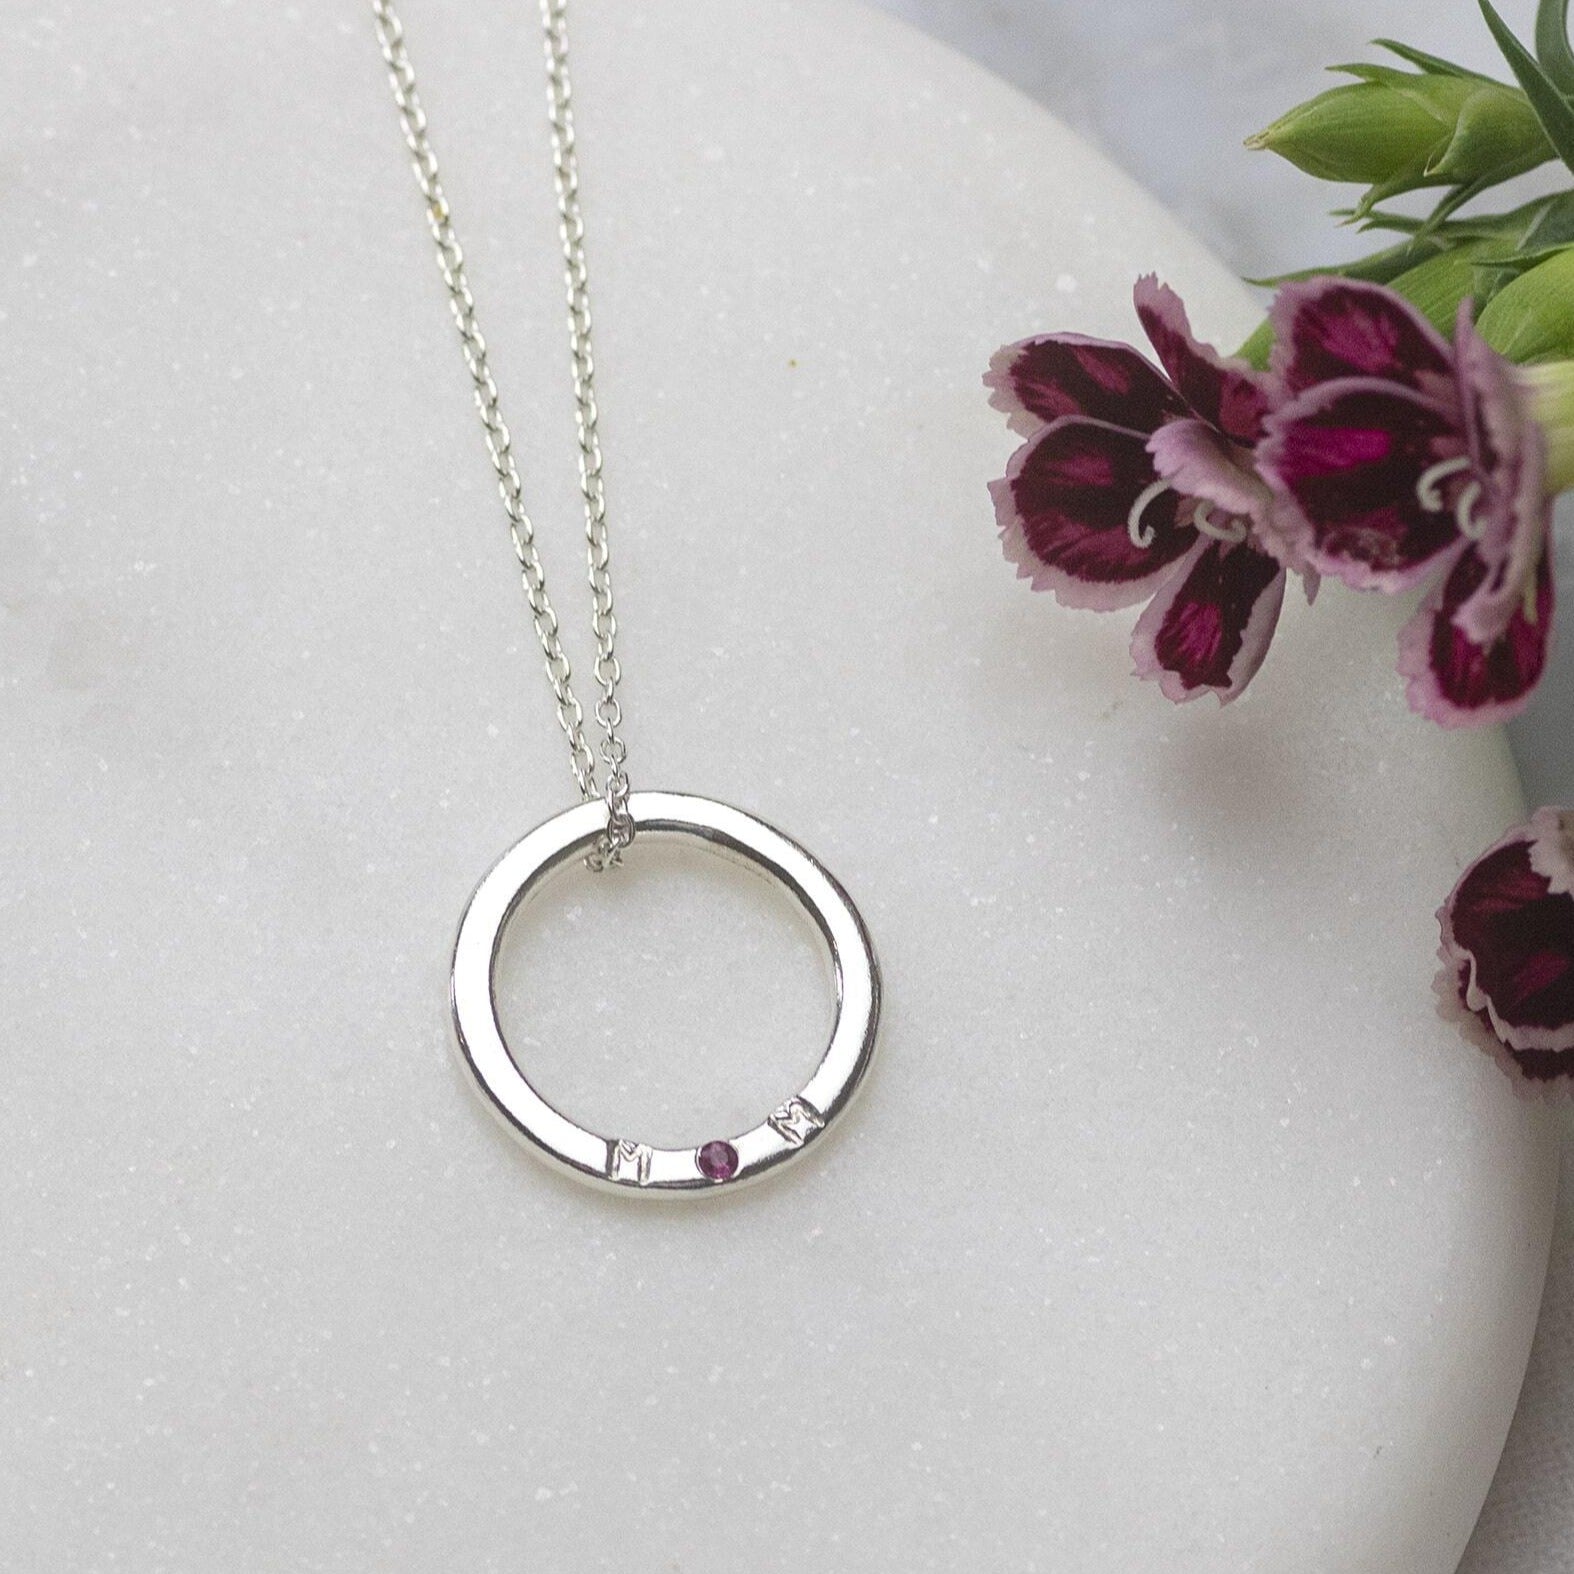 Silver MOM necklace with birthstone